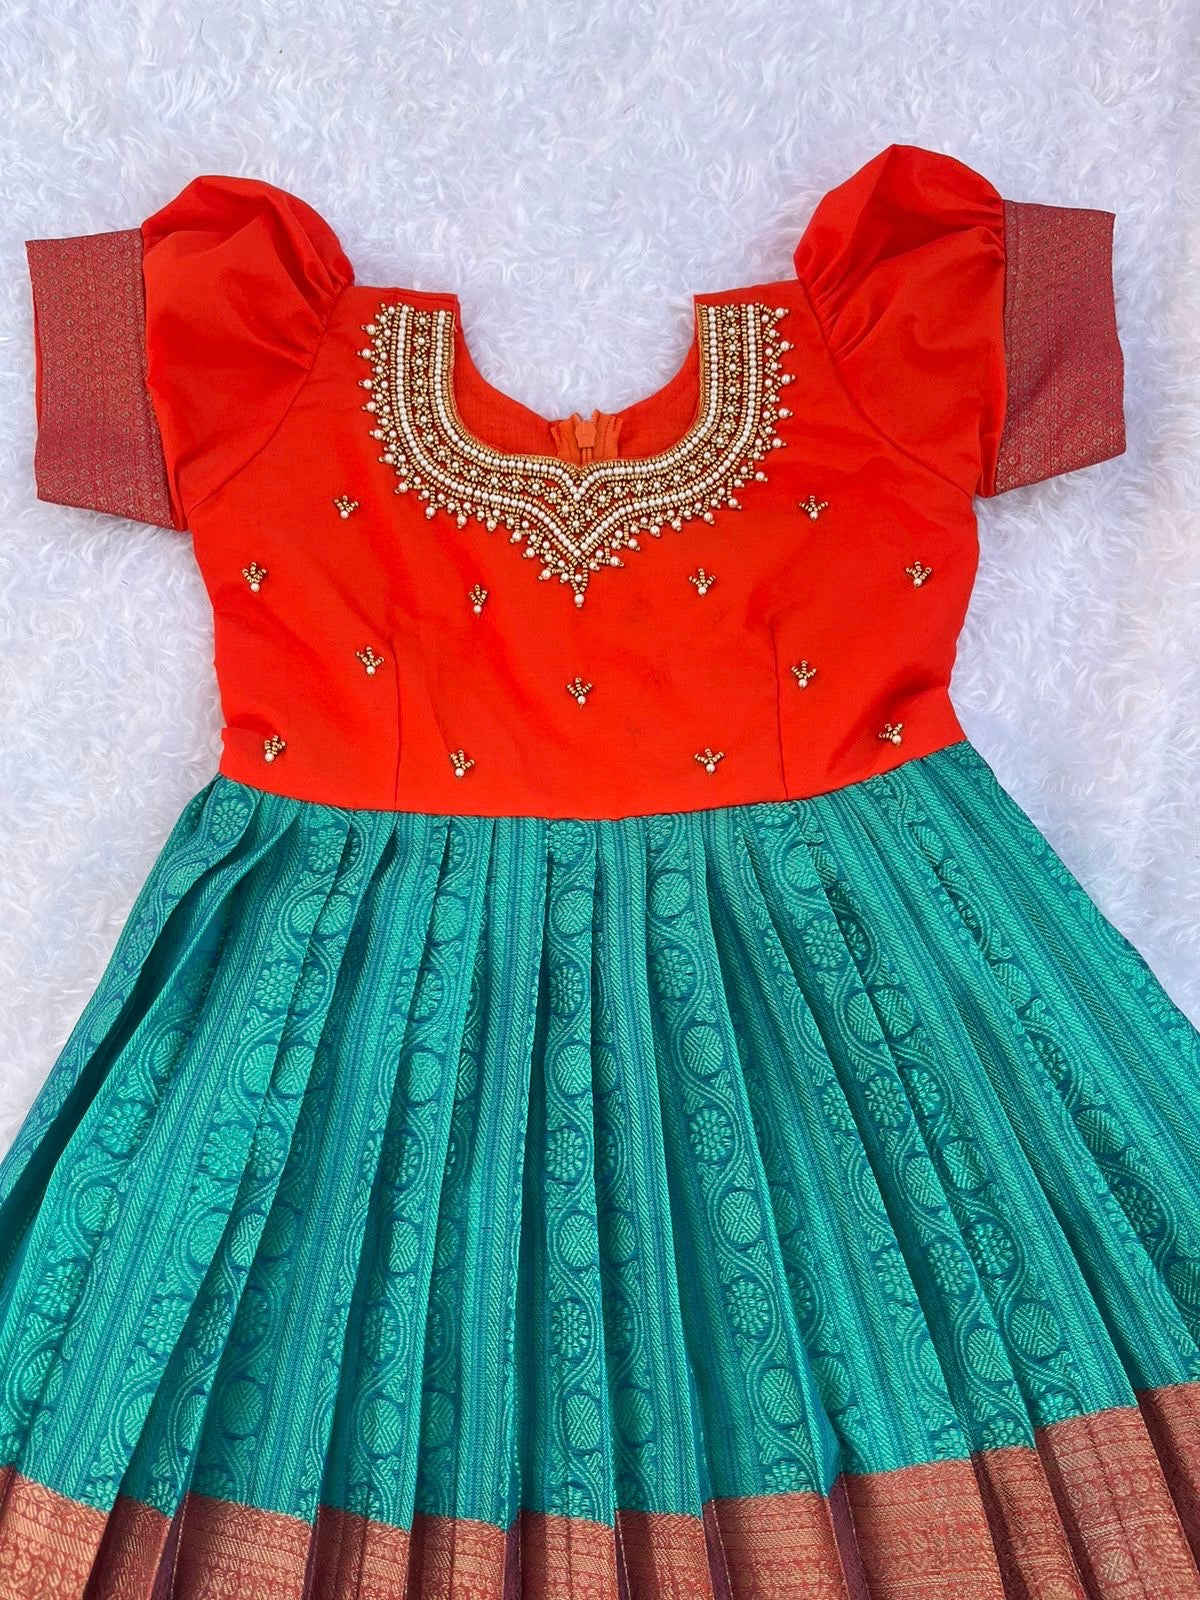 Regal Ruby and Teal Ensemble Frock